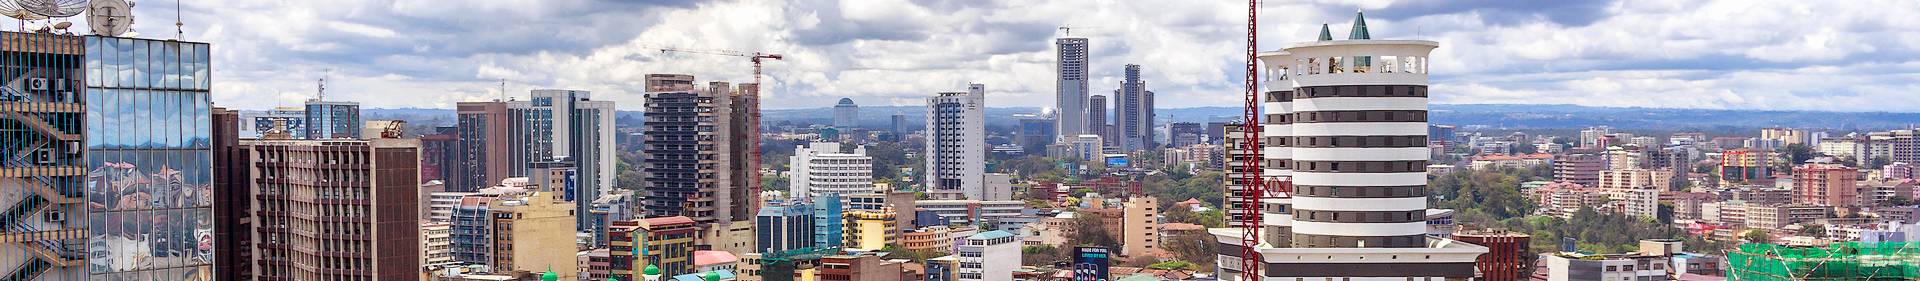 City in East Africa